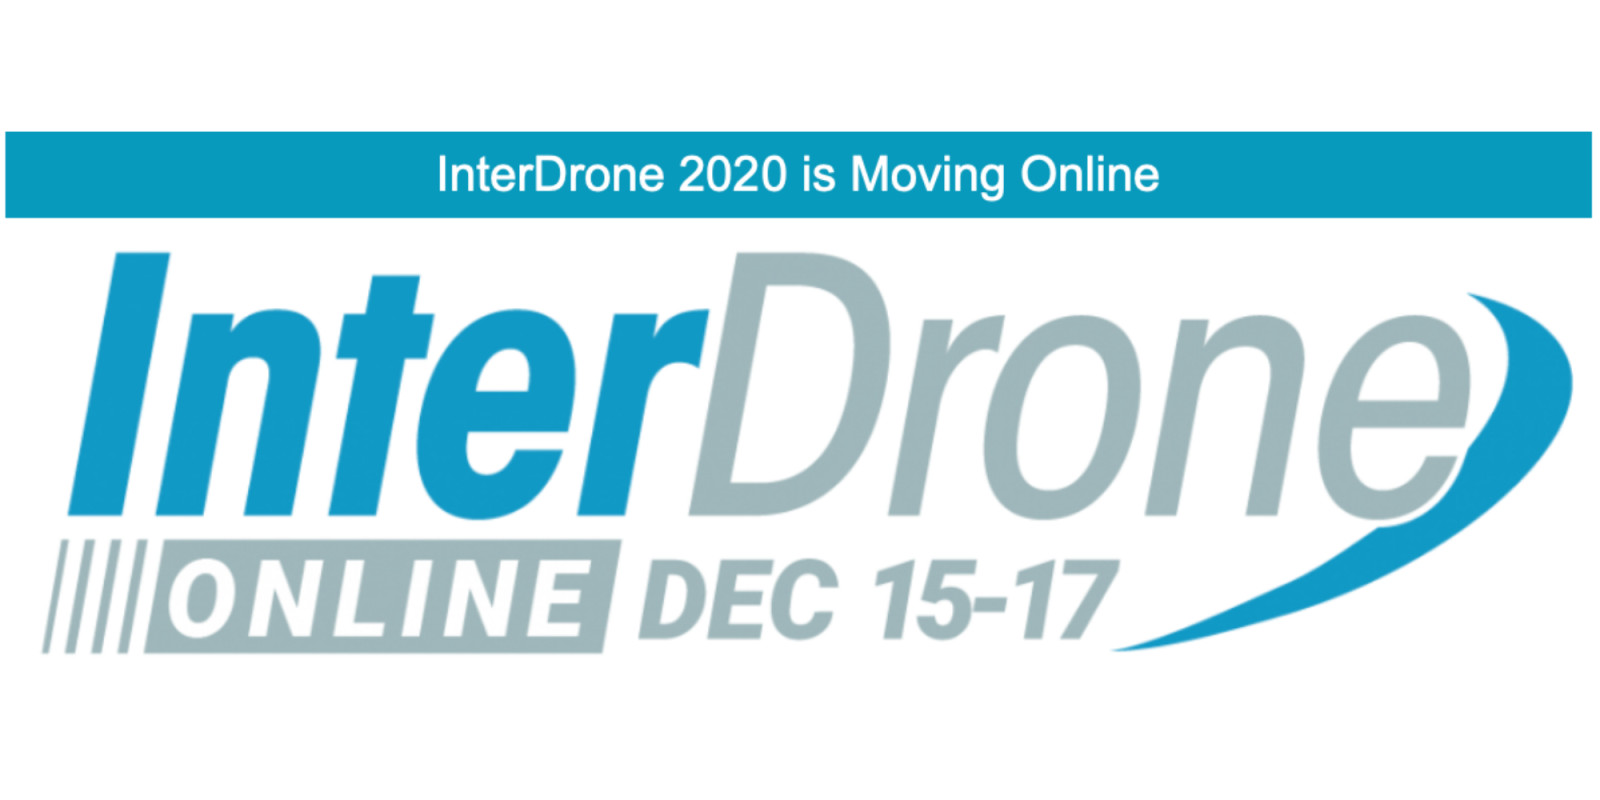 Interdrone moves online